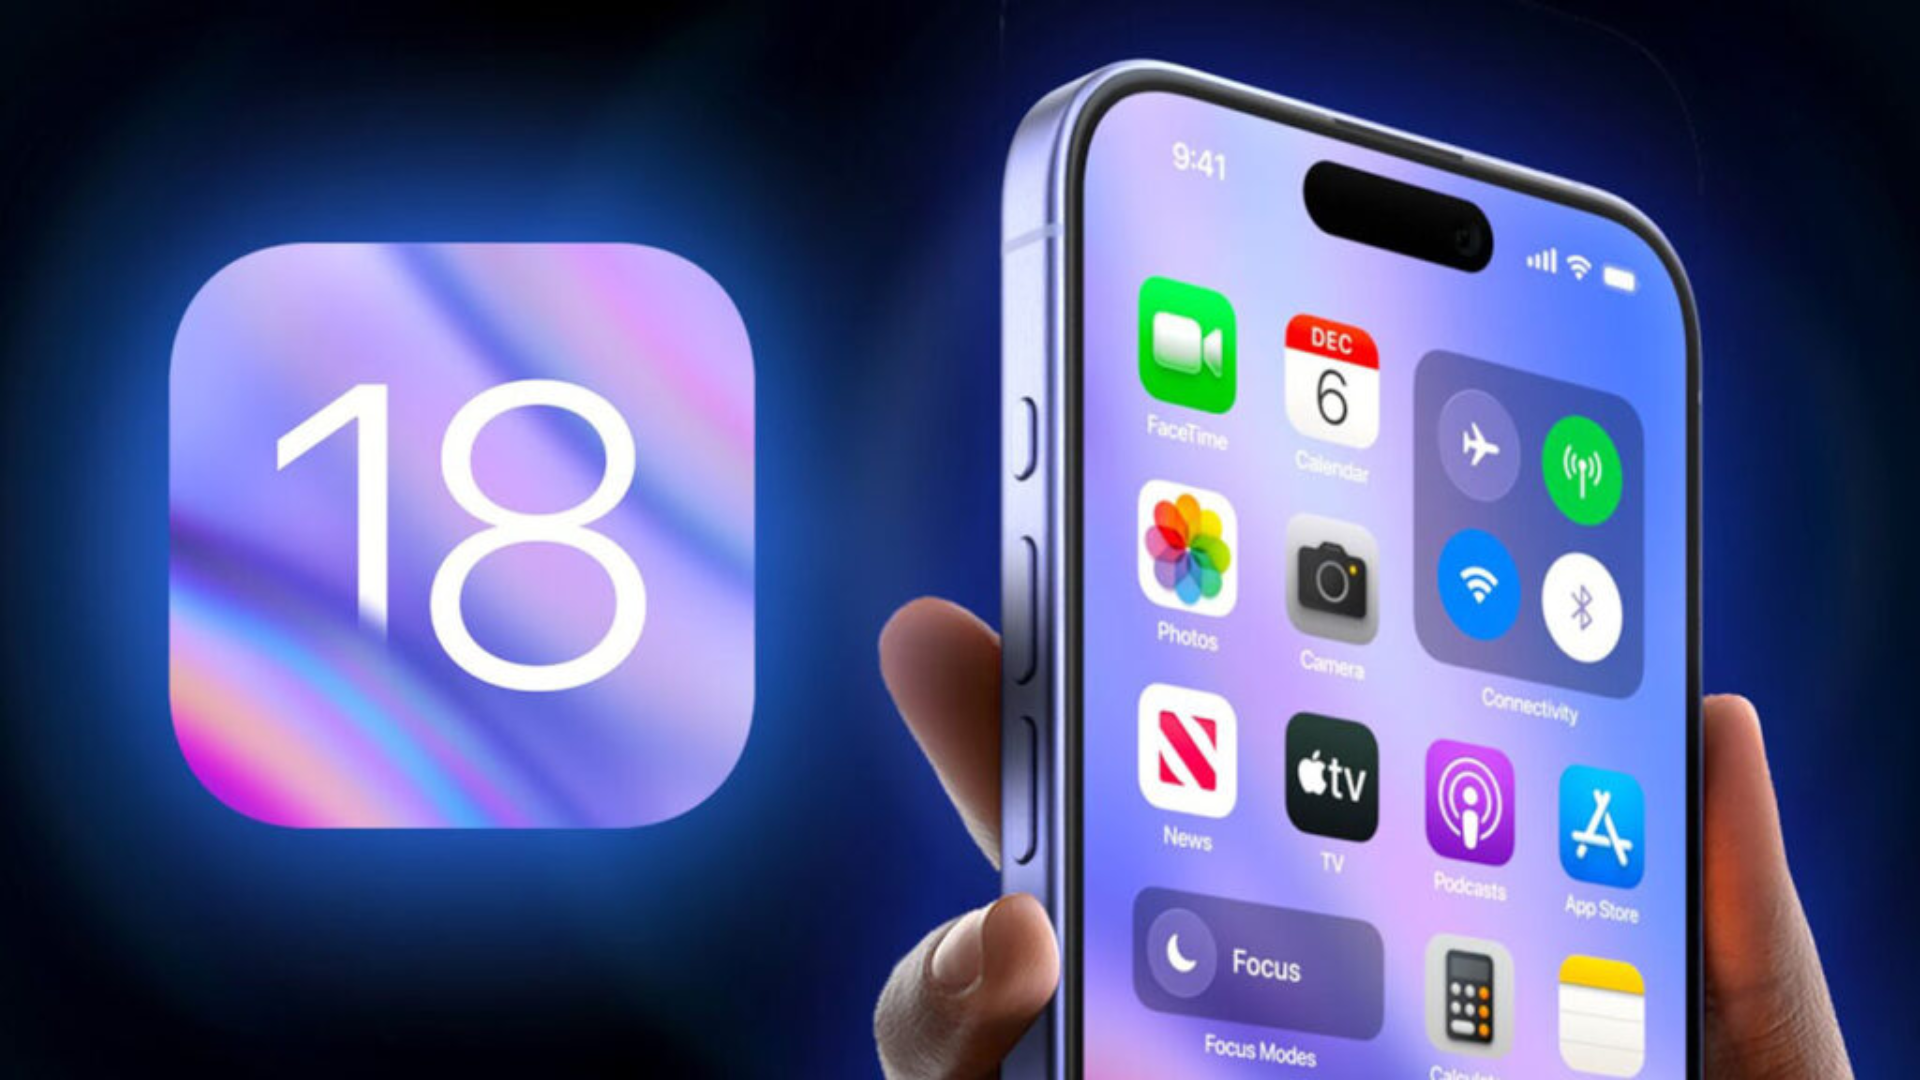 Apple’s iOS 18 to Elevate Basic App Functions with AI Upgrades: Decoding the Implications